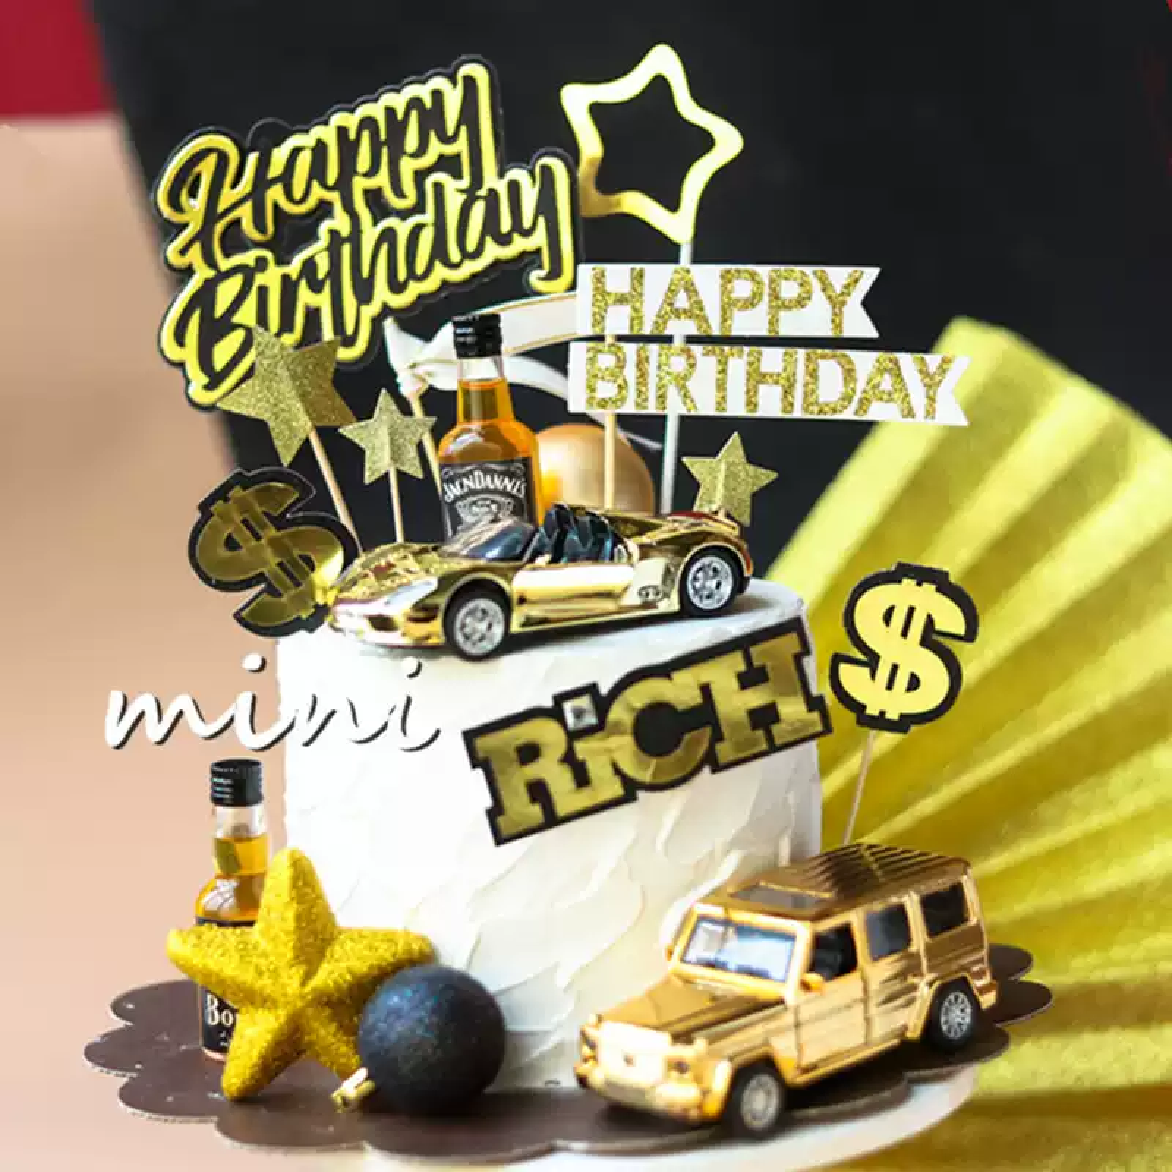 Cake Topper, Cake Decorations- '4 x4' off road vehicle - Gold - Rampant Coffee Company